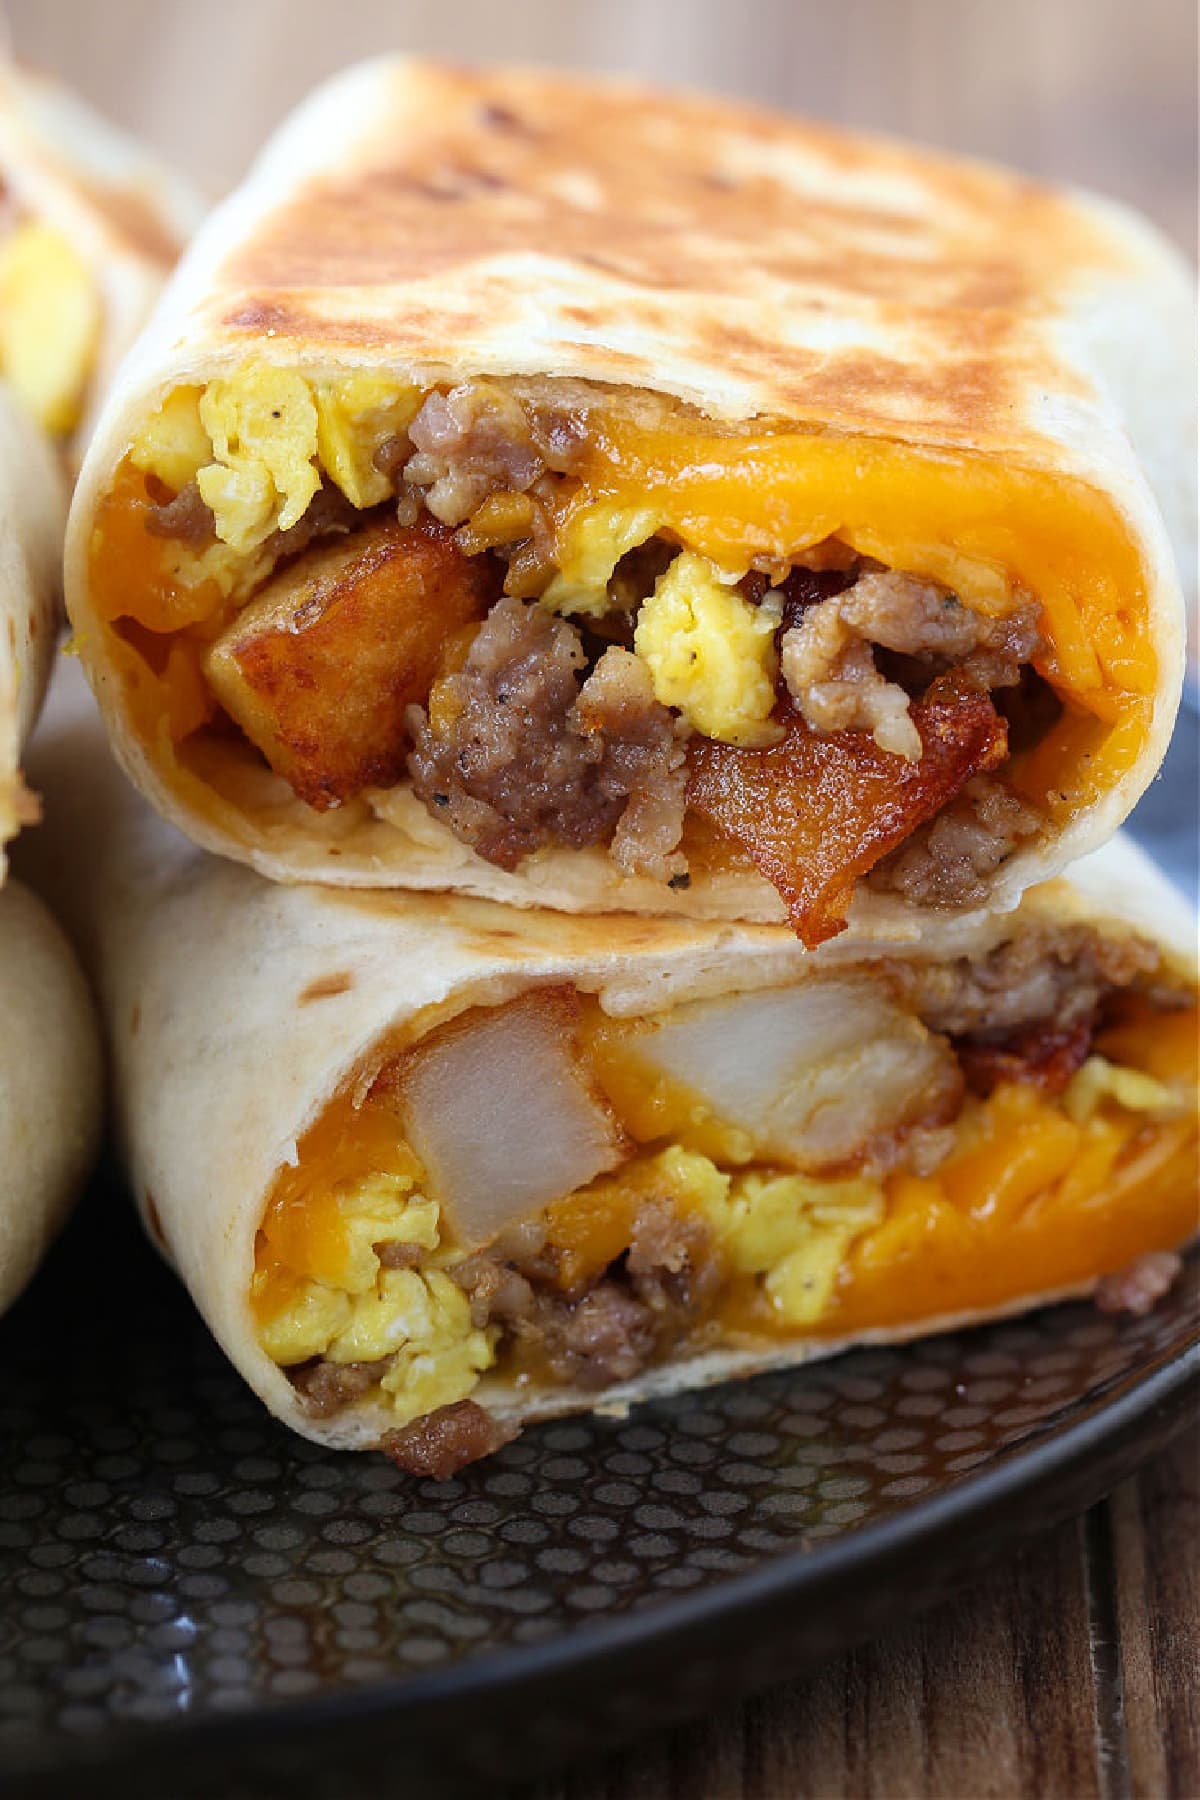 Breakfast Burritos with cheese, sausage, potatoes and egg cut in half on a plate